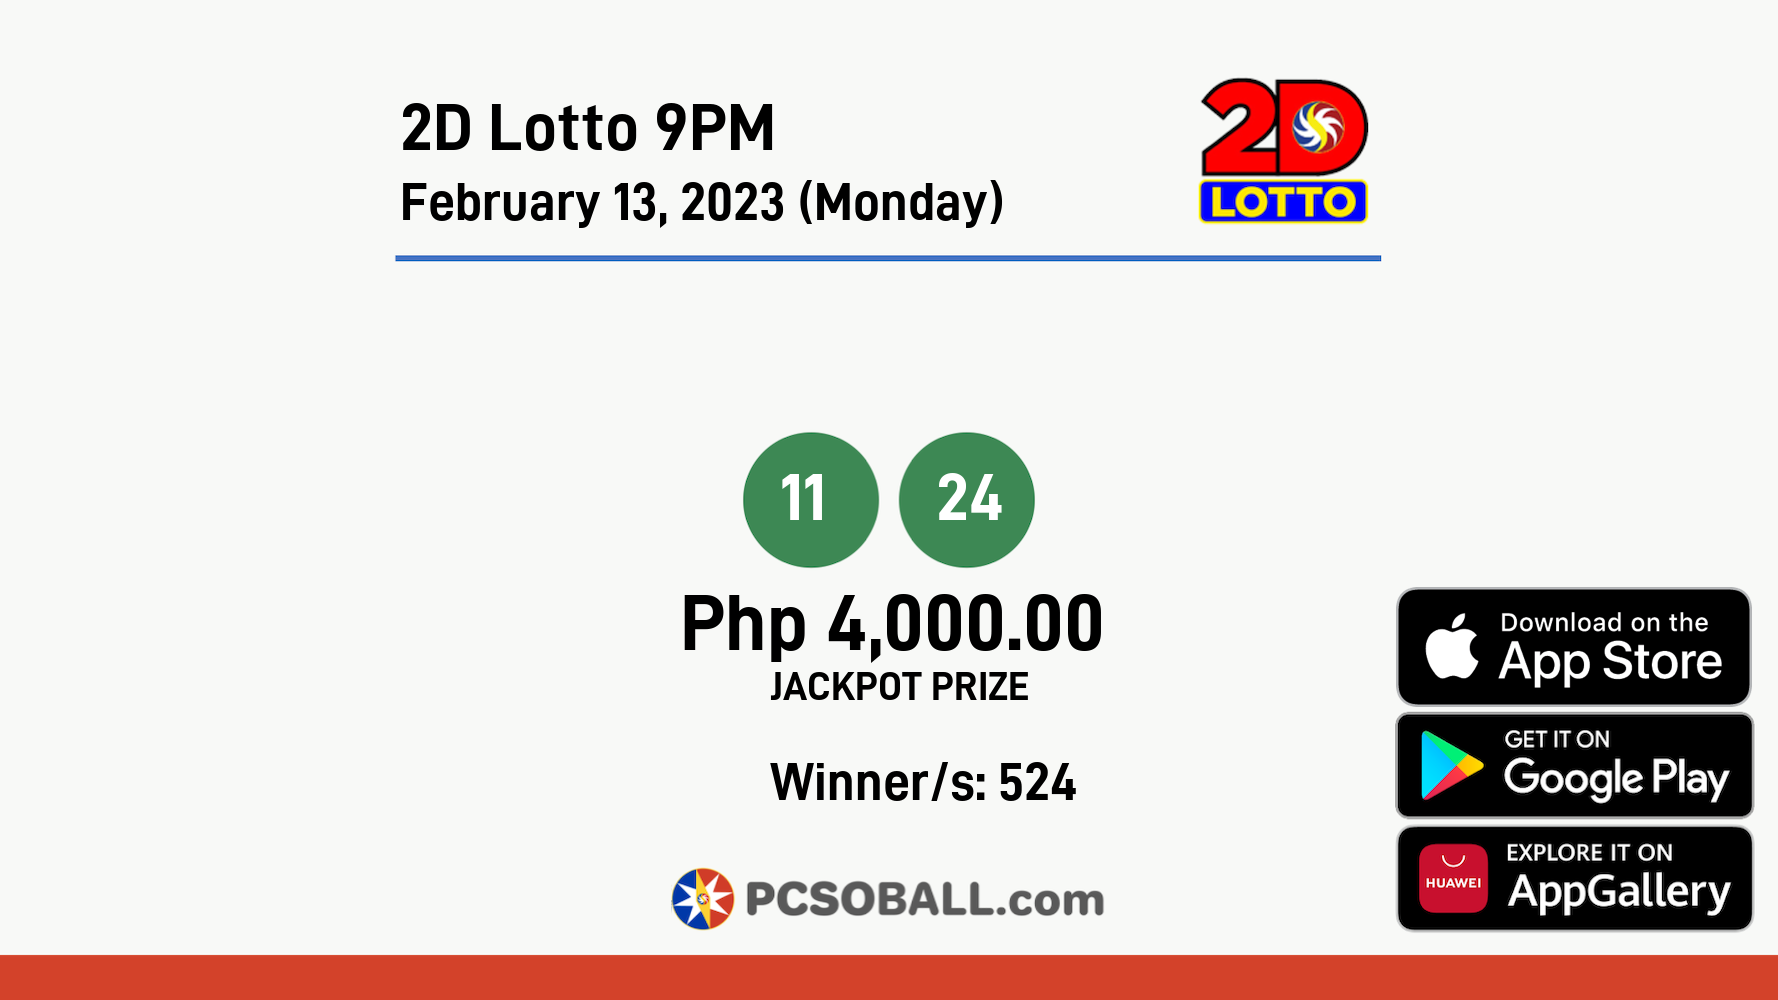 2D Lotto 9PM February 13, 2023 (Monday) Result